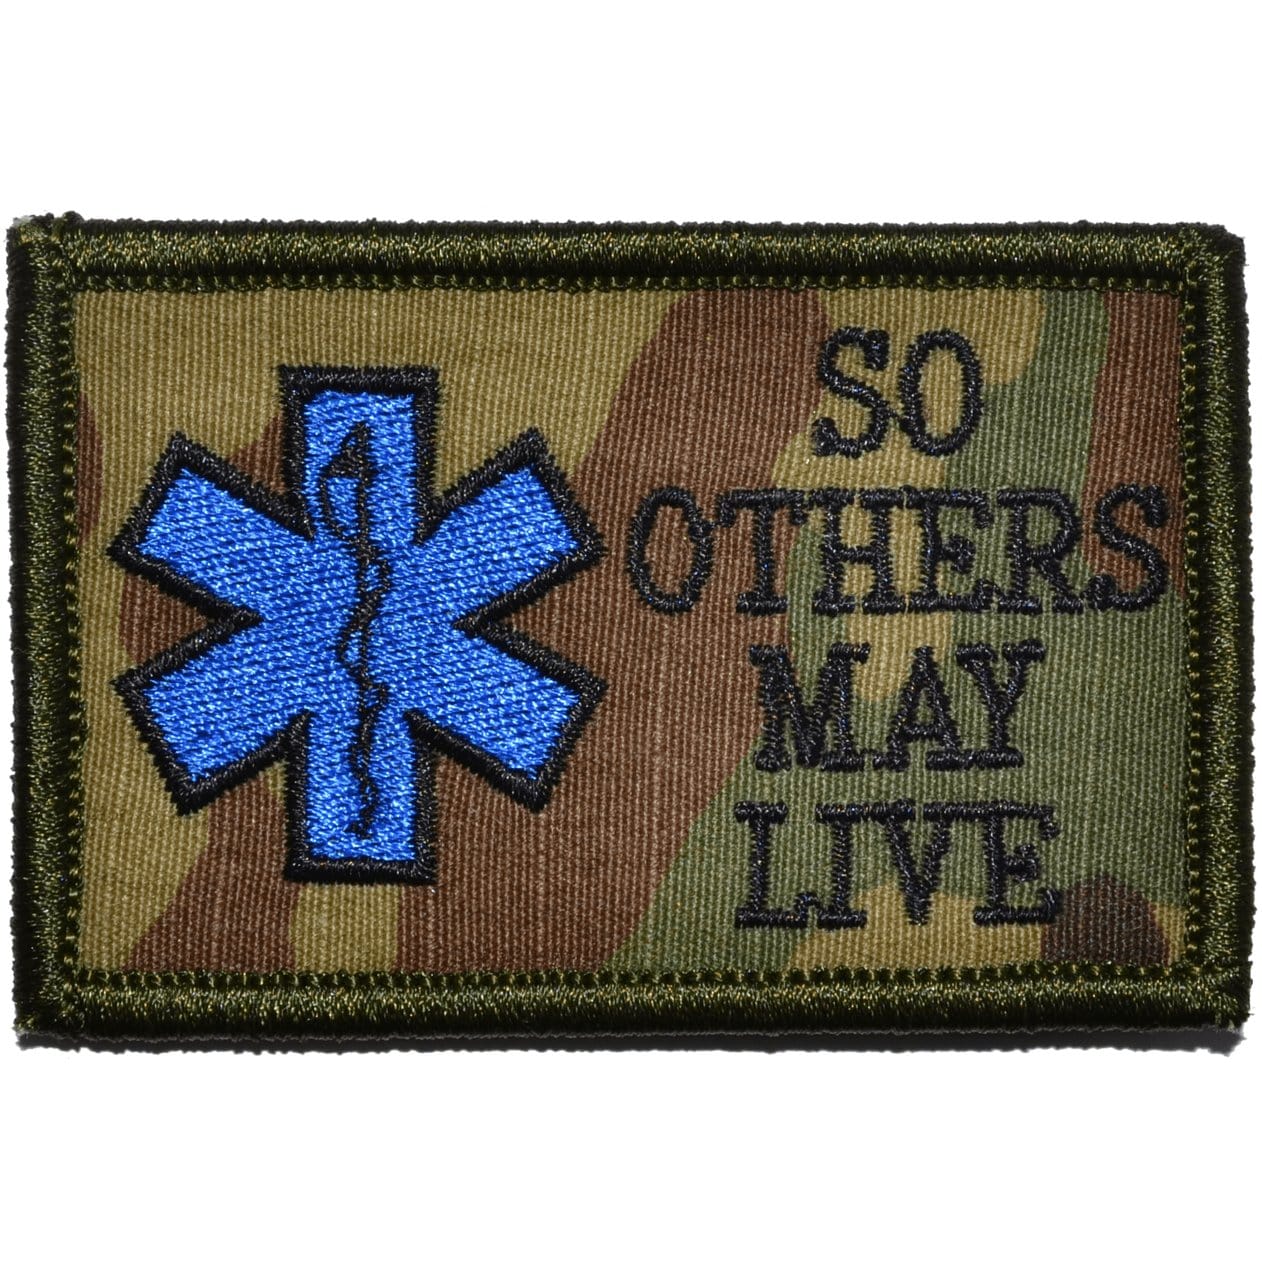 Tactical Gear Junkie Patches MultiCam EMS So Others May Live - 2x3 Patch